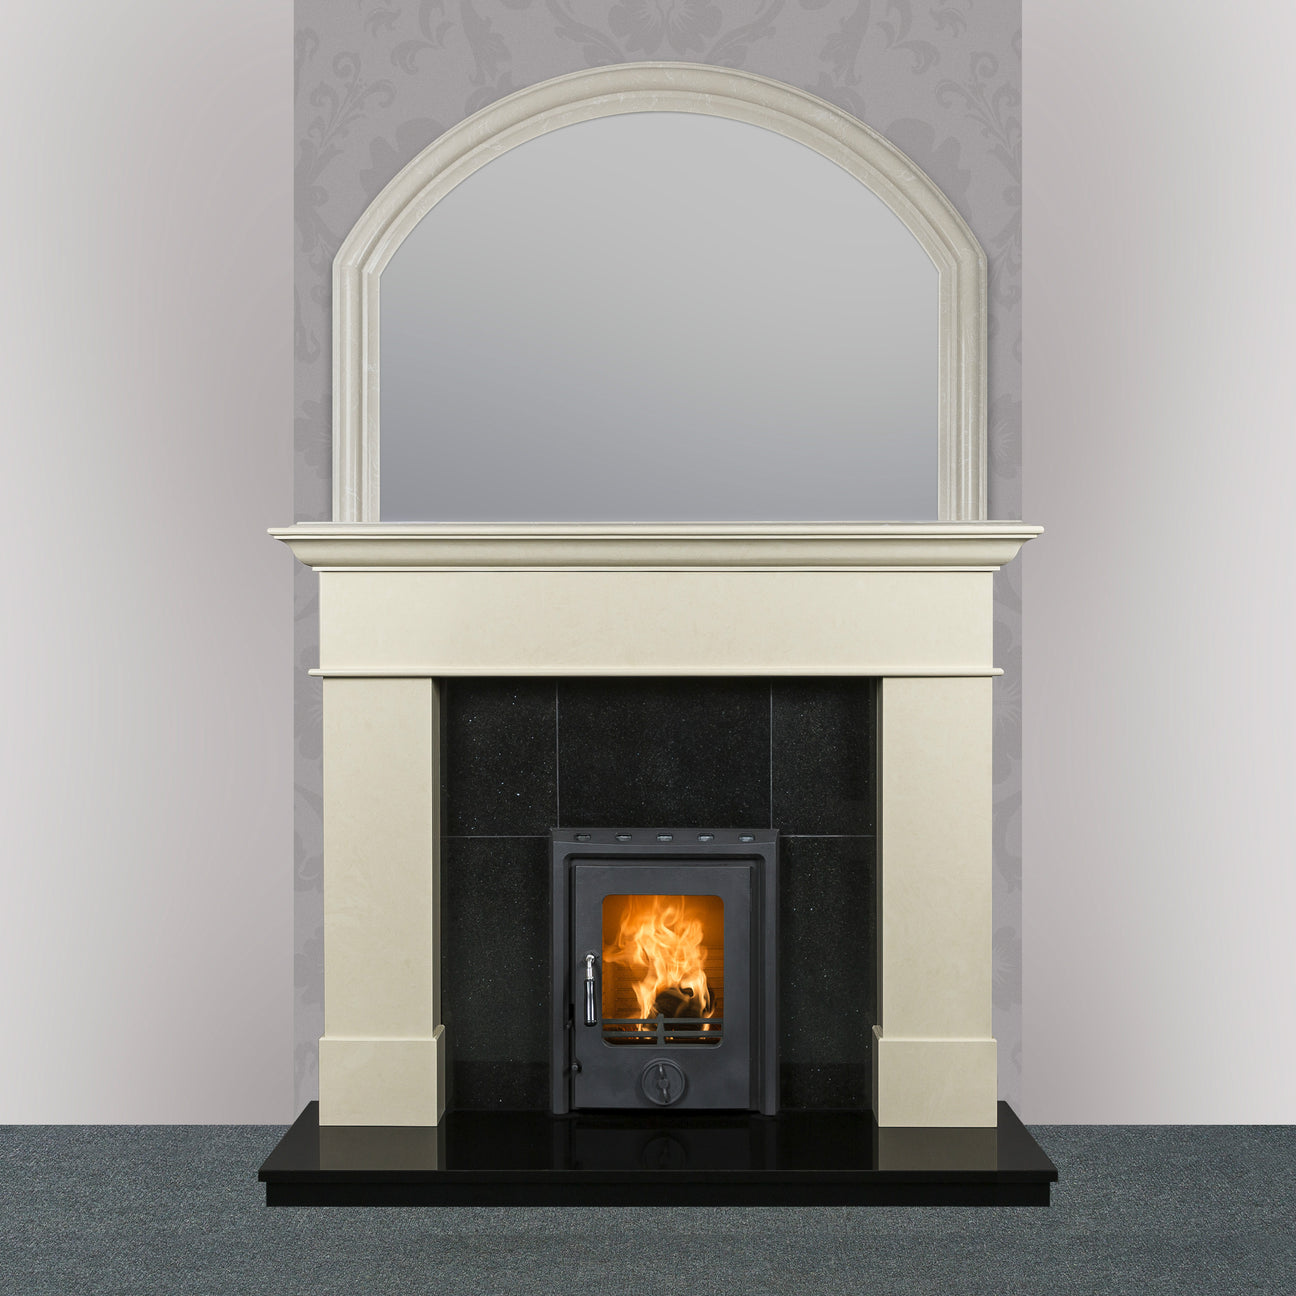 Image of Geraldton marble fireplace in ivory pearl finish with Kate insert stove